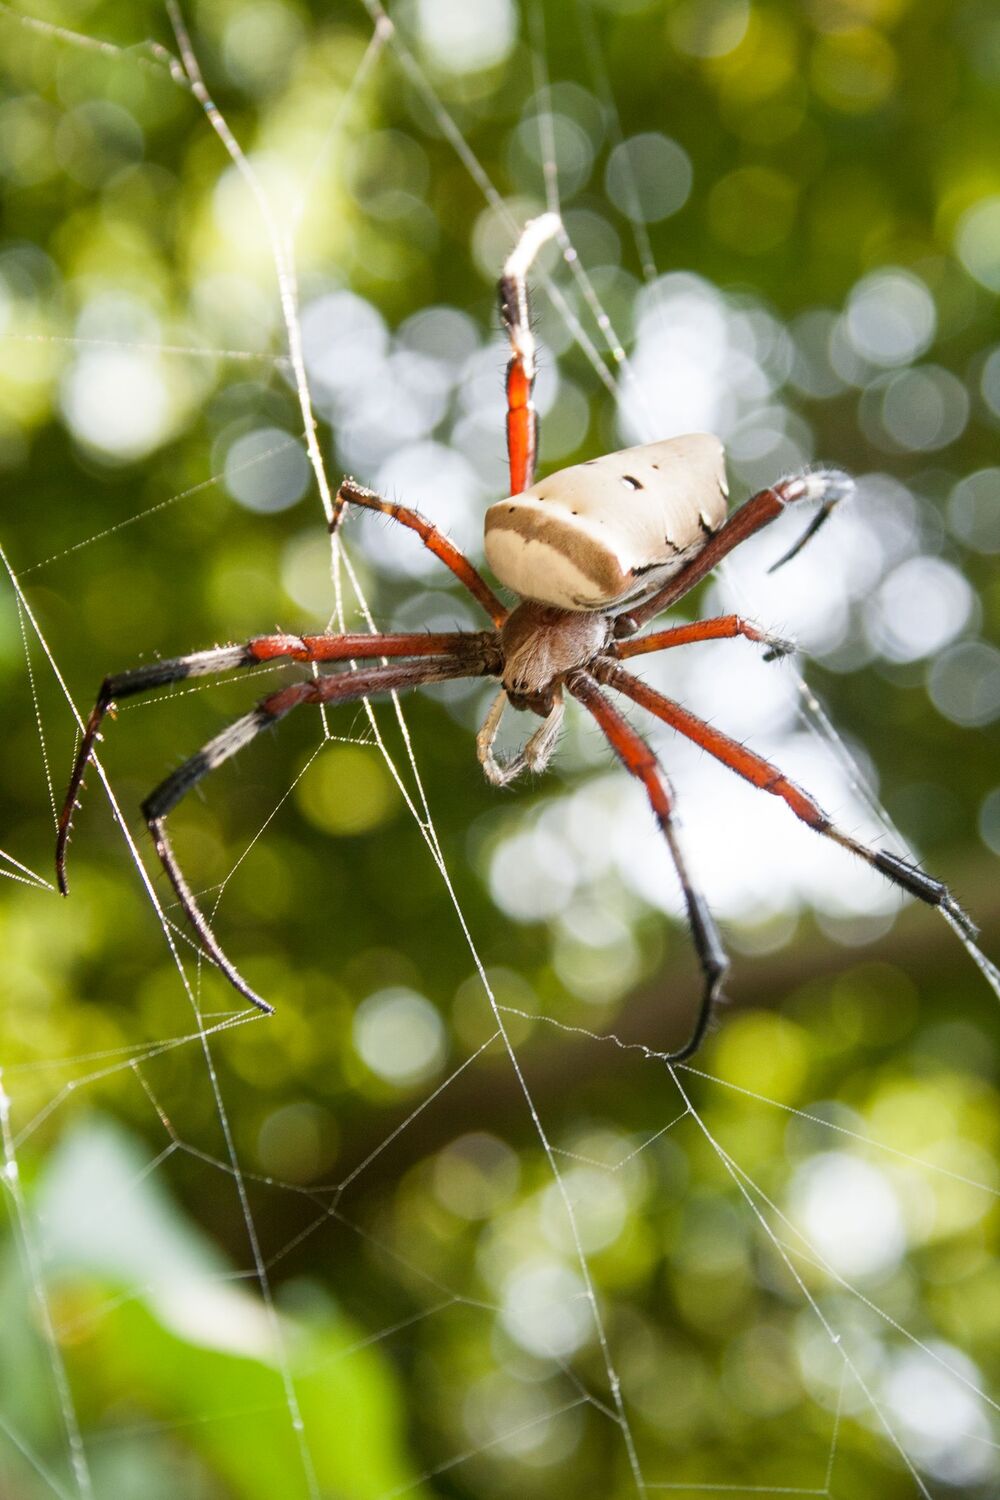 A web-spinning spider: one of the hunter arthropods of the forest